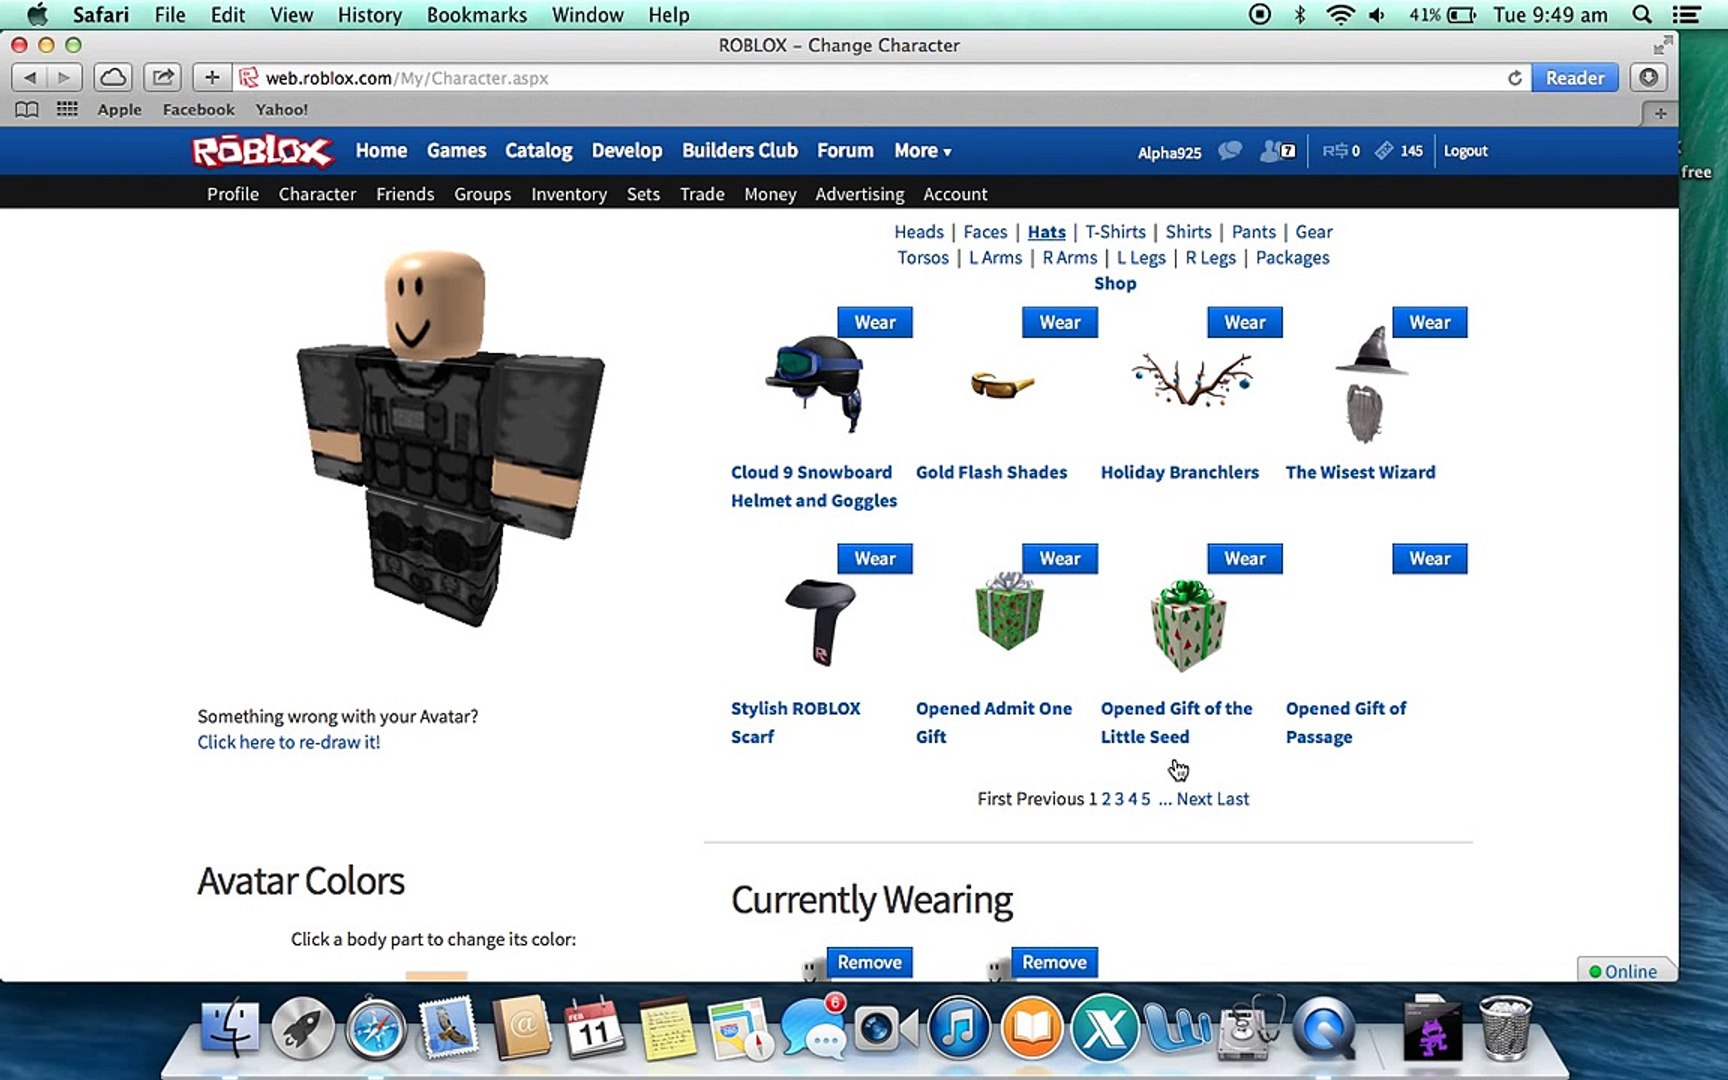 How To Look Like A Swat Team Guy On Roblox How To Make An Out